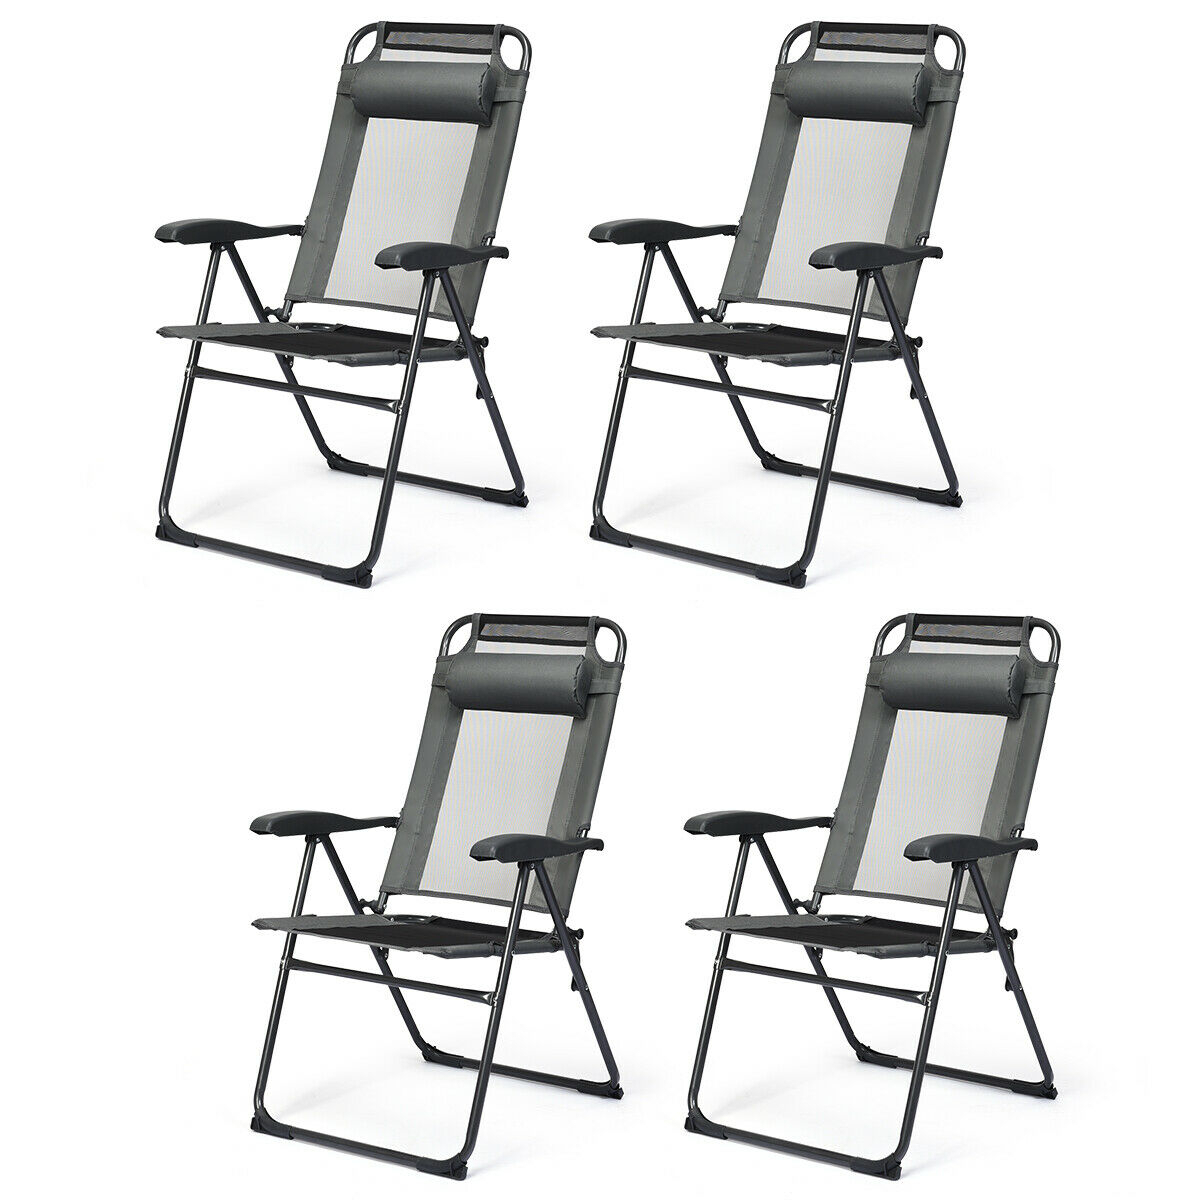 4PC Folding Chairs Adjustable Reclining Chairs With Headrest Patio Garden Grey